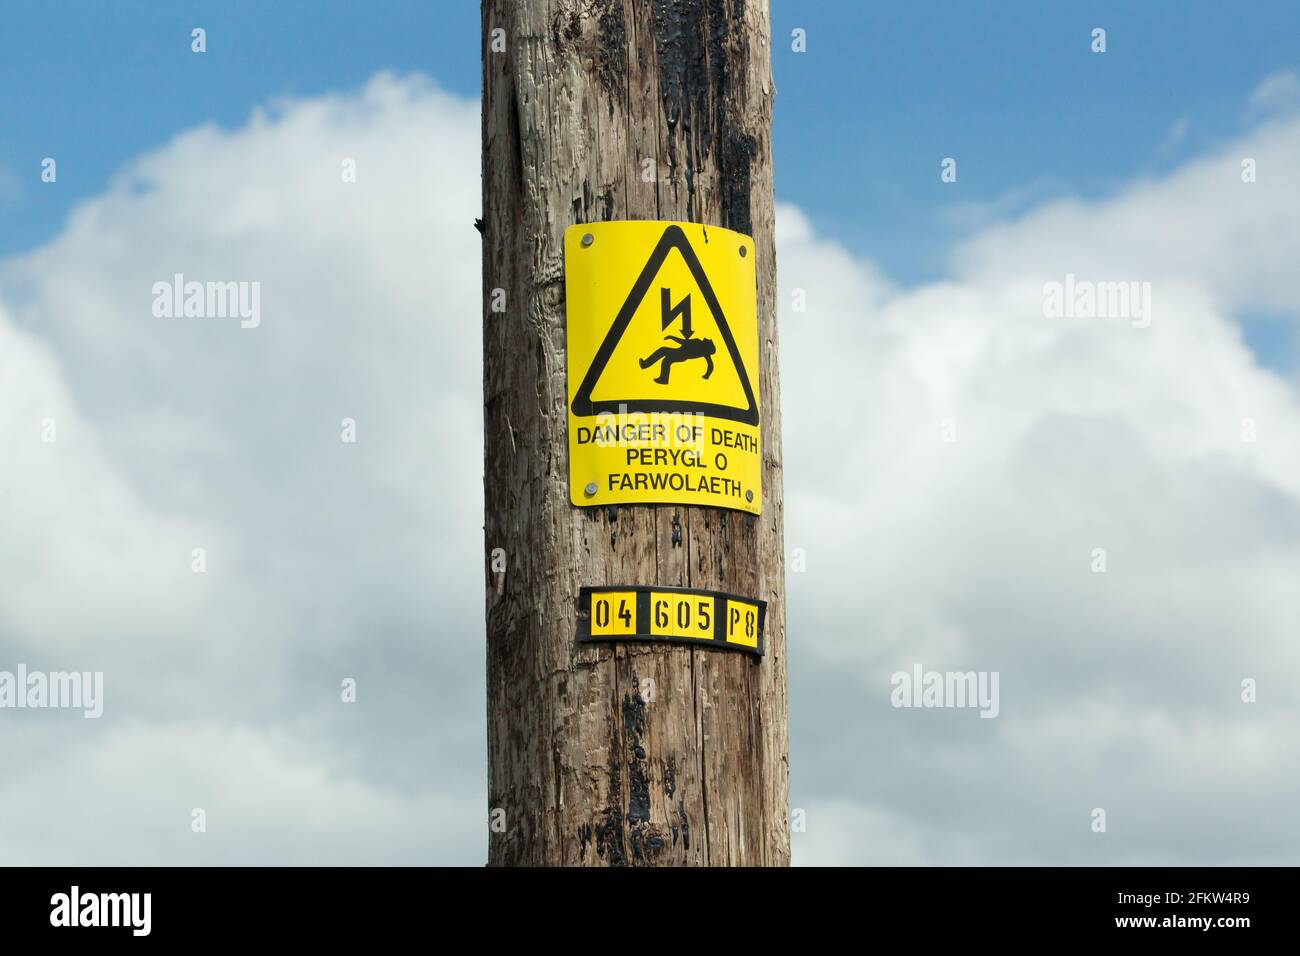 Electricity power line with prominent warning sign in English and Welsh langauges warning of electrocution and danger of death Stock Photo